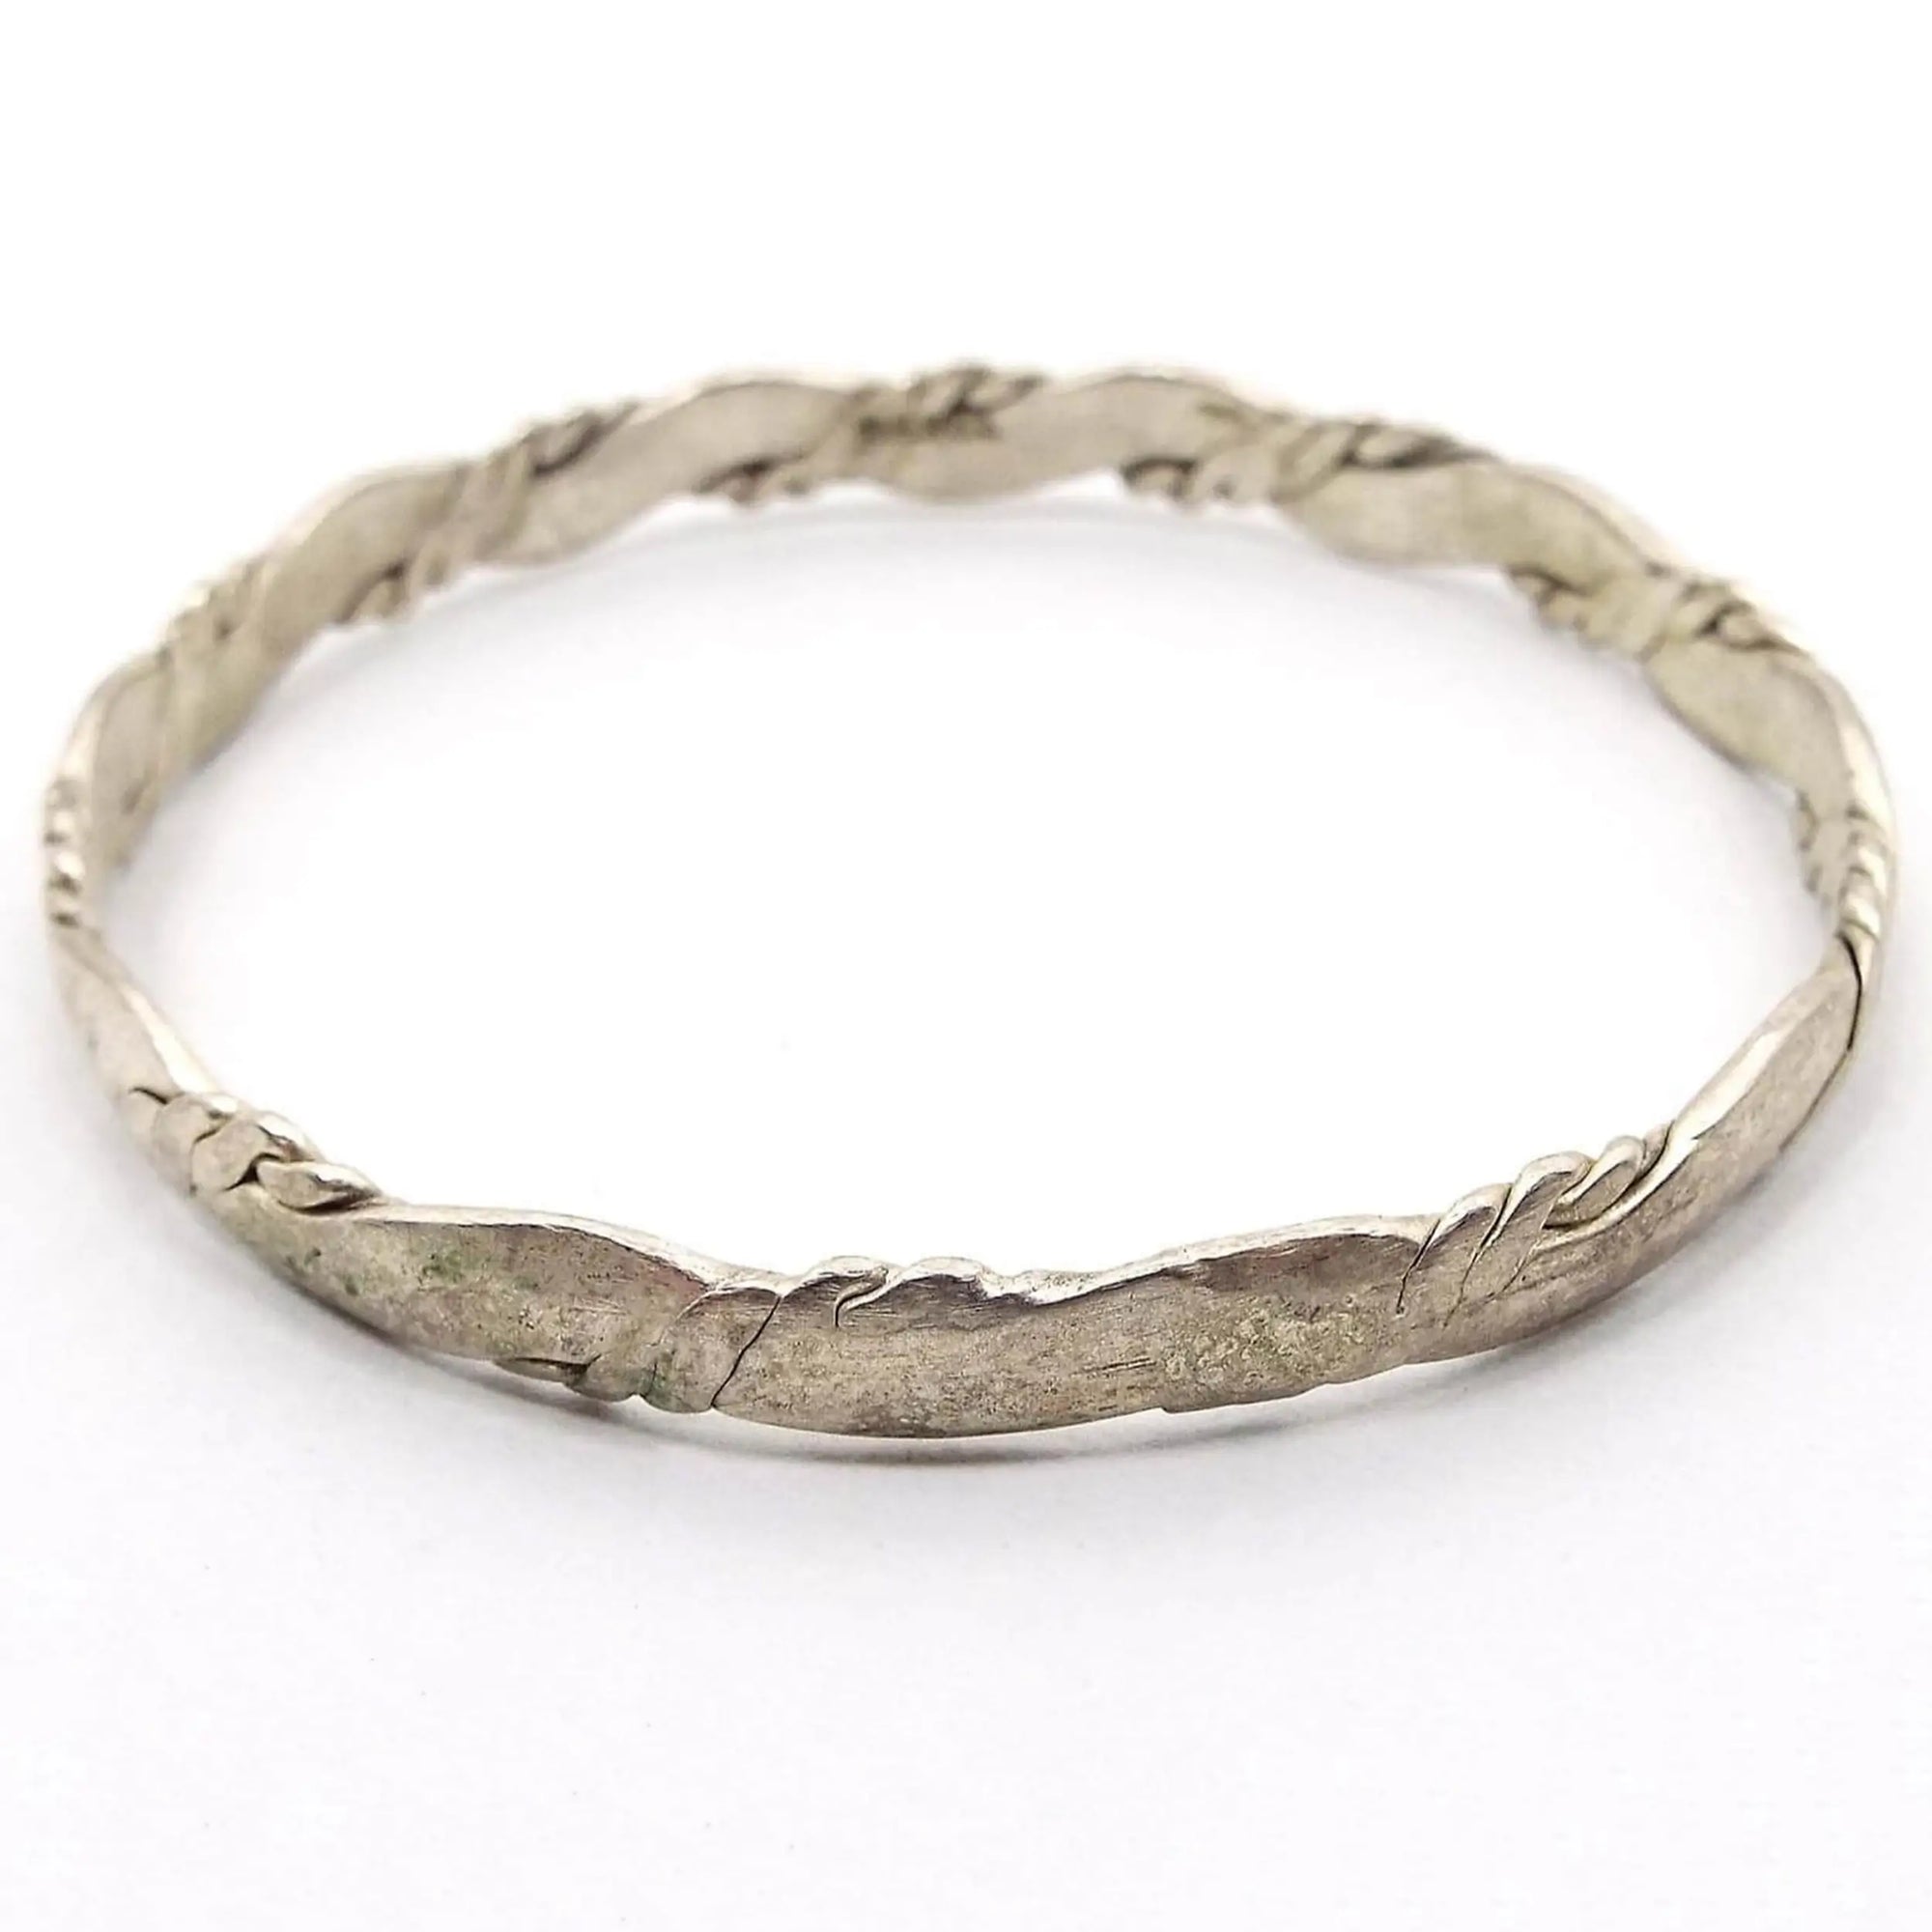 Angled view of the retro vintage Taxco bangle bracelet. It has a twisted design that's been hammered so the inside and outside area are flat. It is a darkened silver tone in color.